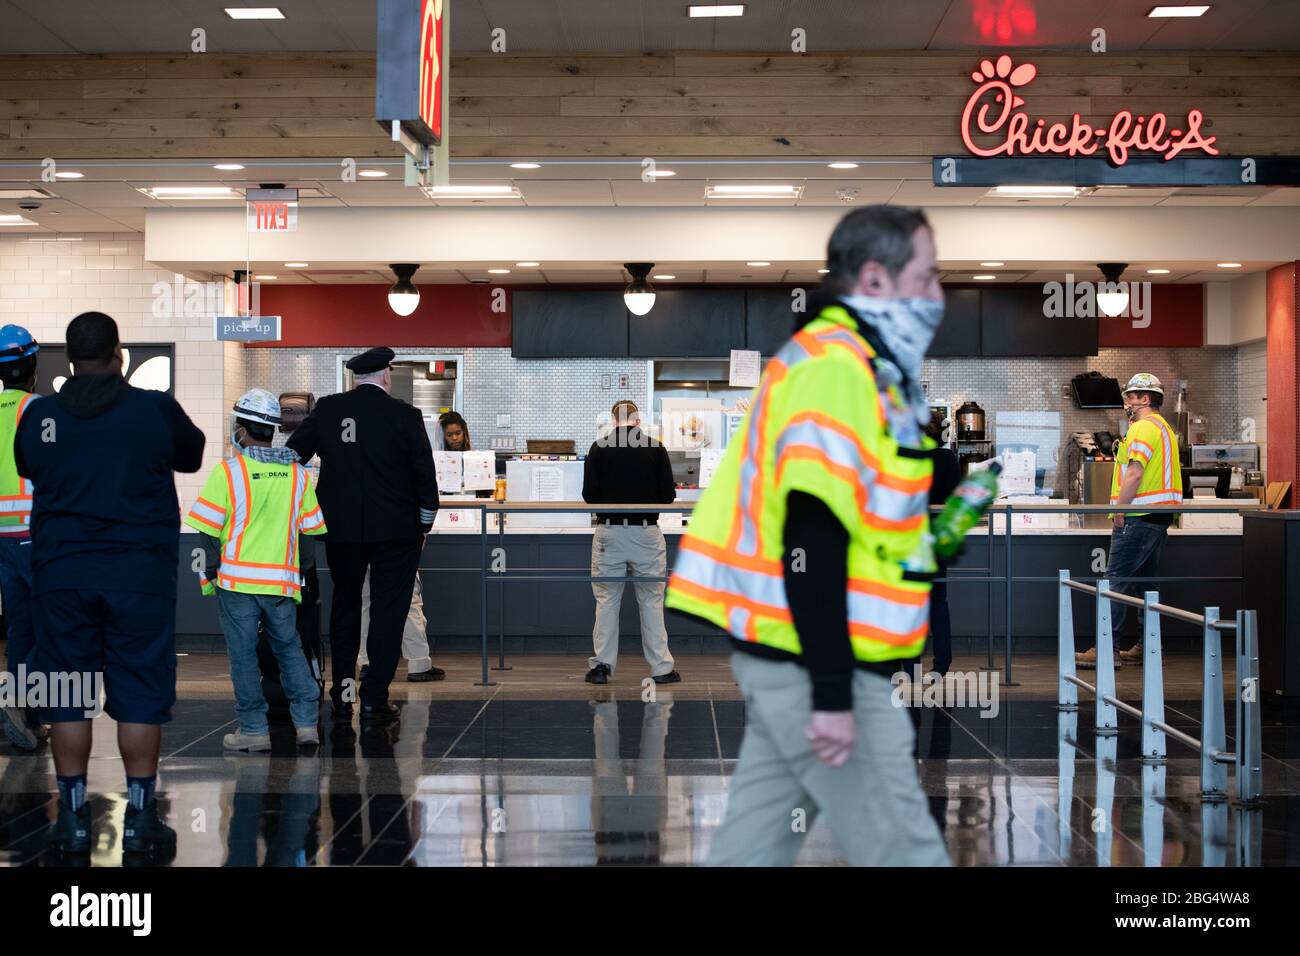 Washington, USA. 20th Apr, 2020. Construction workers and travelers wait for food at a Chic-Fil-A location at Ronald Reagan Washington National Airport near Washington, DC on April 20, 2020 amid the Coronavirus pandemic. Over the weekend, Congressional negotiations continued on an additional economic stimulus bill in response to the worsening COVID-19 outbreak, as President Trump encouraged protesters nationwide who demonstrated to reopen the economy and end social distancing measures. (Graeme Sloan/Sipa USA) Credit: Sipa USA/Alamy Live News Stock Photo